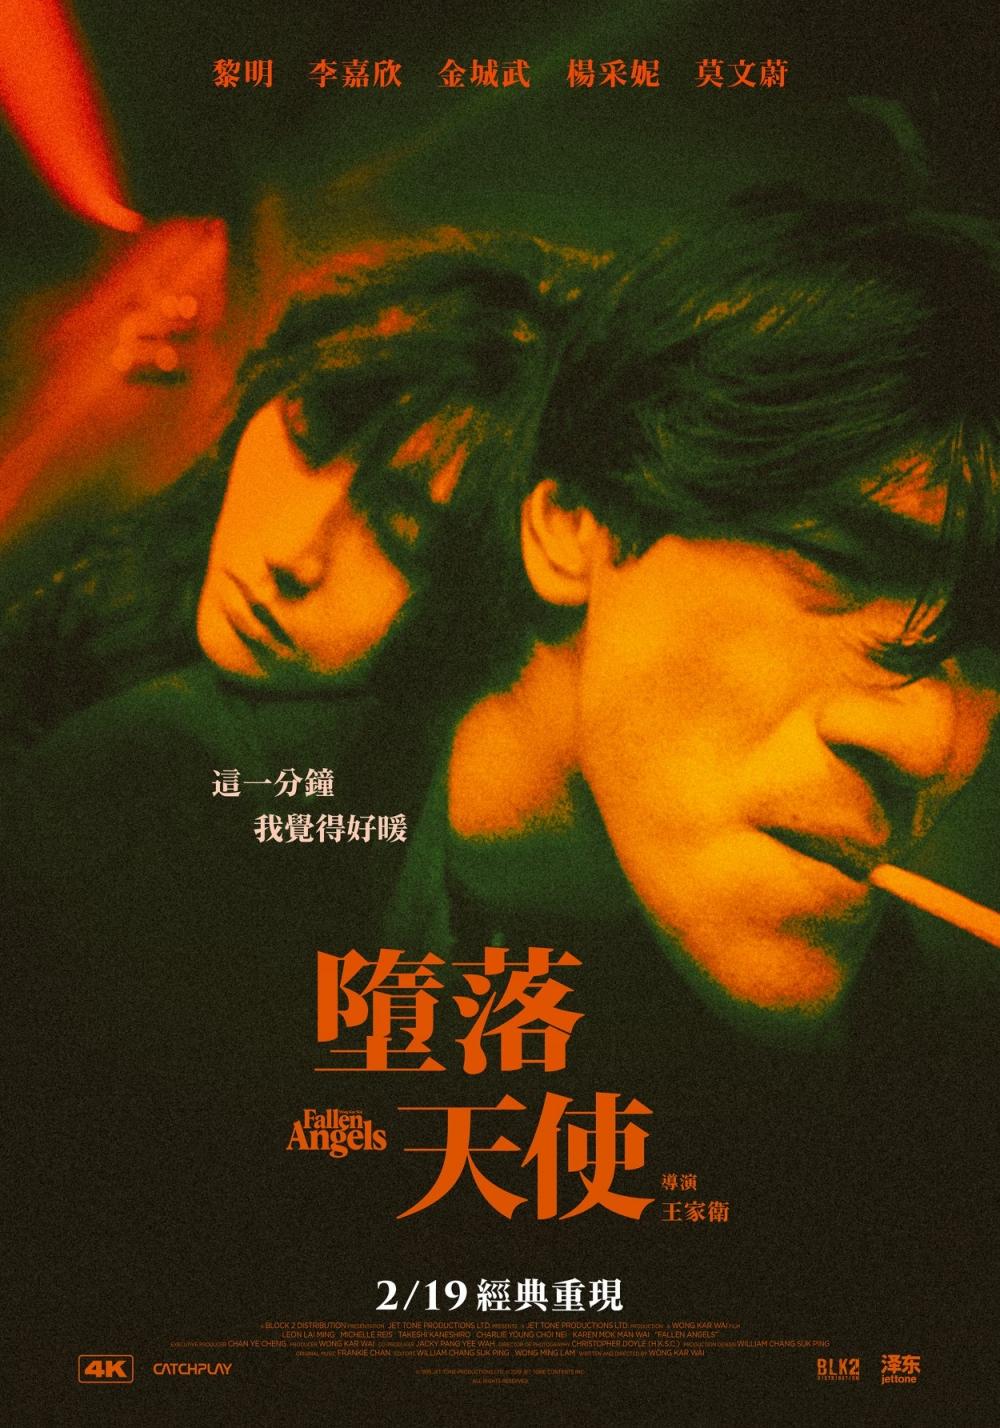 Taiwan Poster (2021 Version), Fallen Angels, 1995 Movies